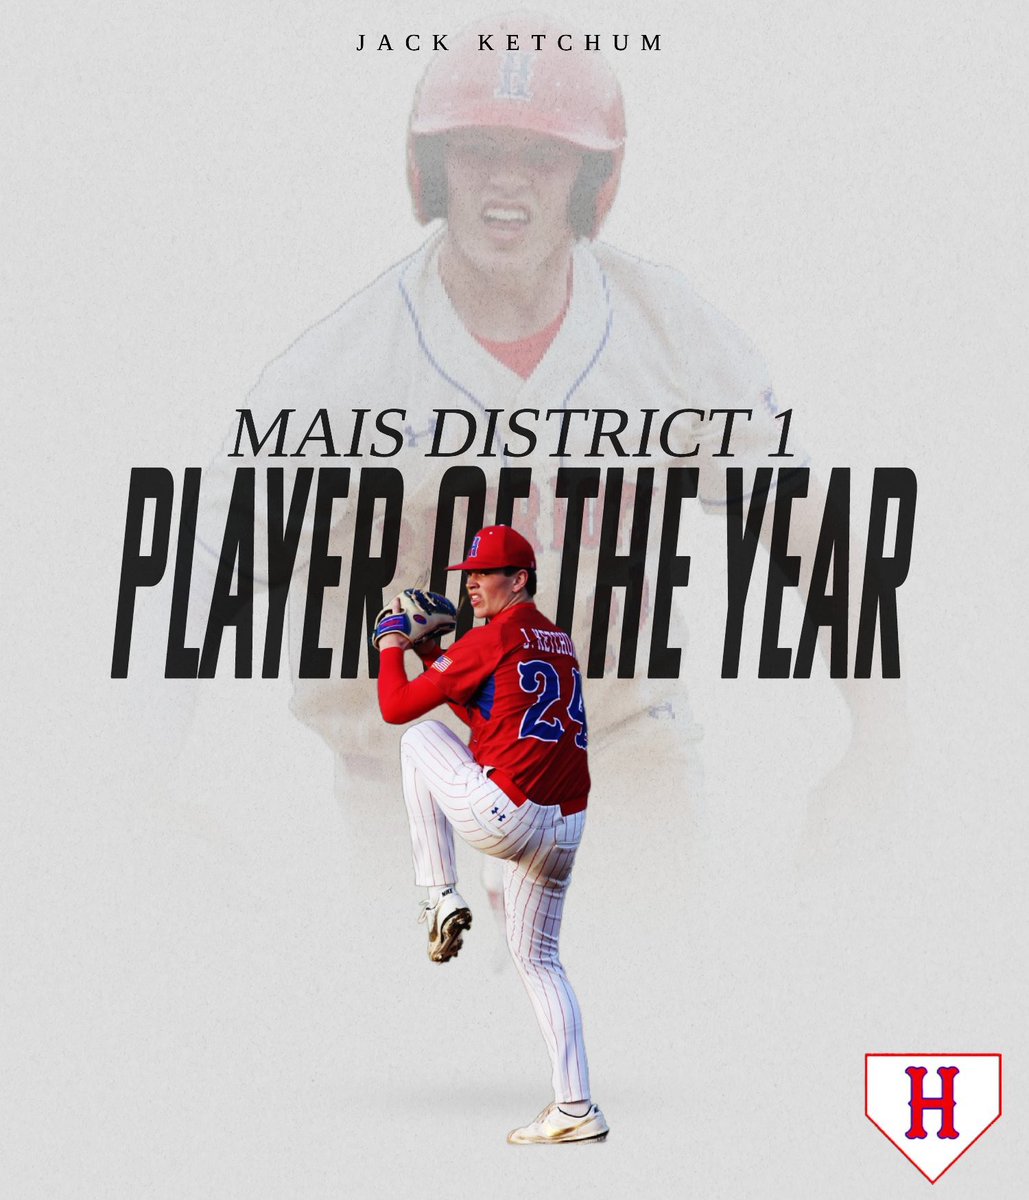 Congratulations to senior @AlabamaBSB signee @jackketchum24 who was selected as MAIS District 1 Player of the Year! A very deserving honor! This district is loaded with great talent! Congrats Jack!